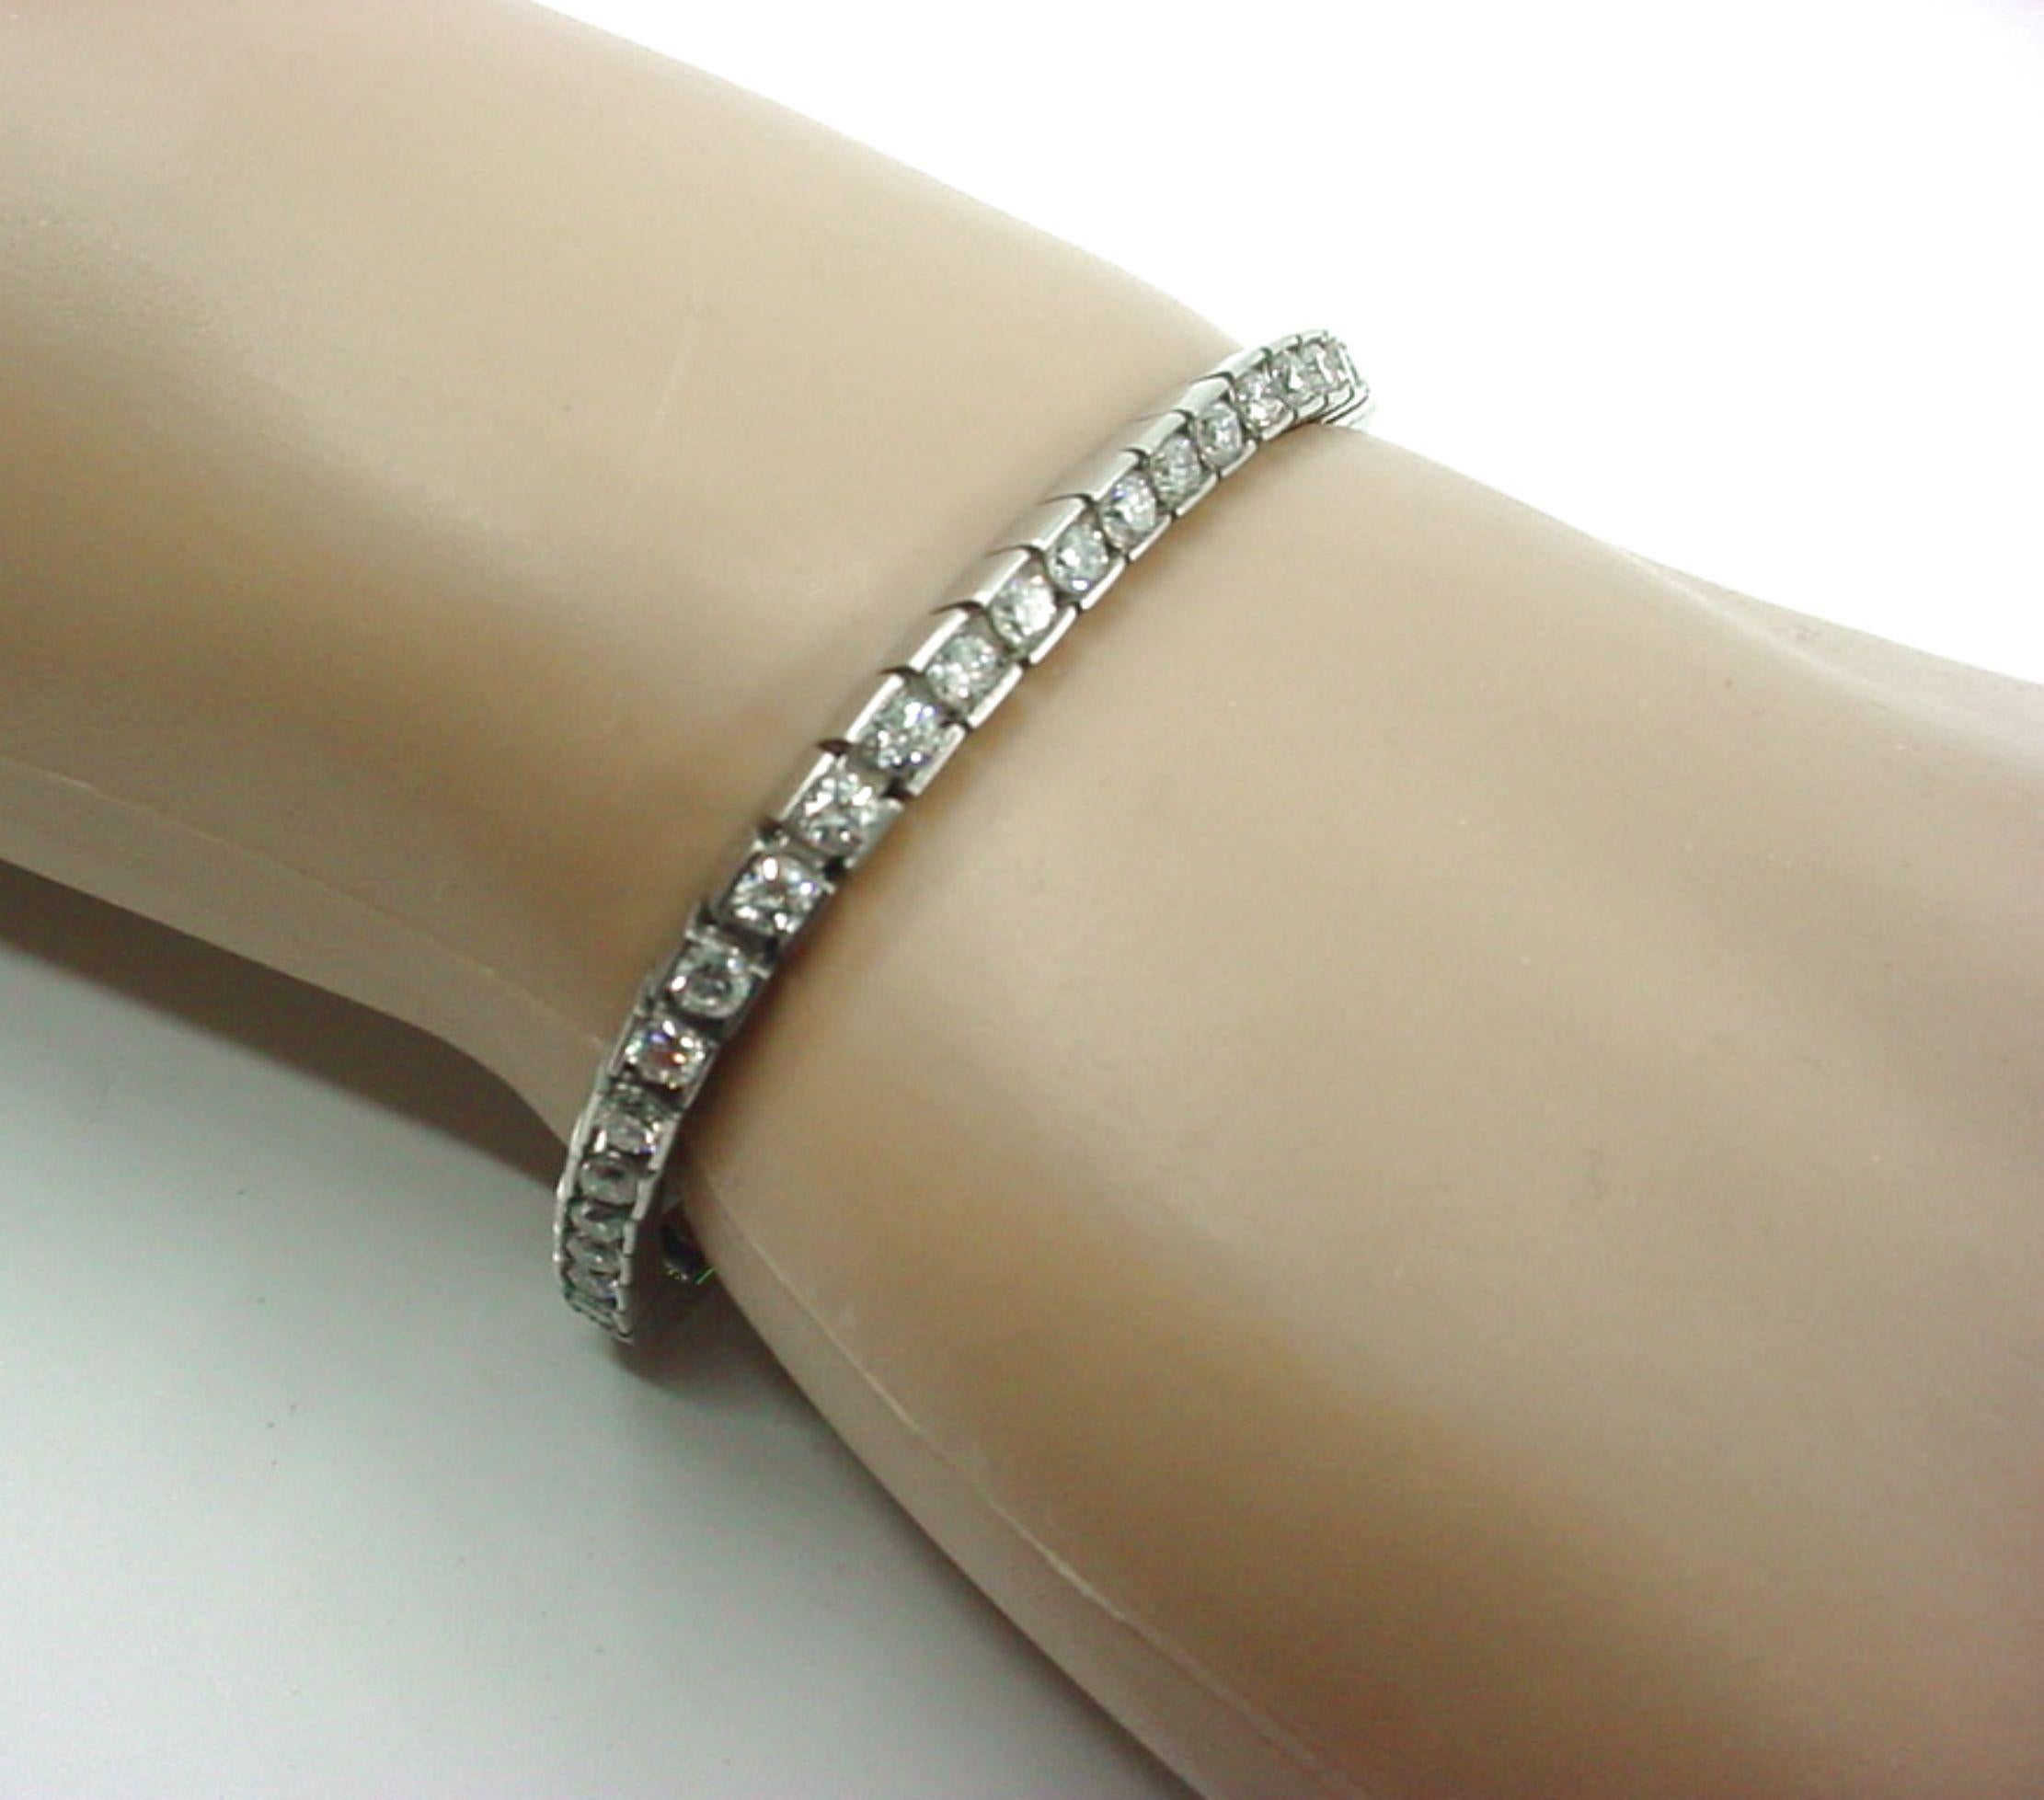 Who doesn't love a classic, elegant, sleek platinum diamond bracelet?

Rendered in sumptuous platinum and is chock full of well match VS2-SI2 diamonds.

The well matched diamonds with an approx. carat weight of 5.18 cts.  18k gold clasp.

Bracelet